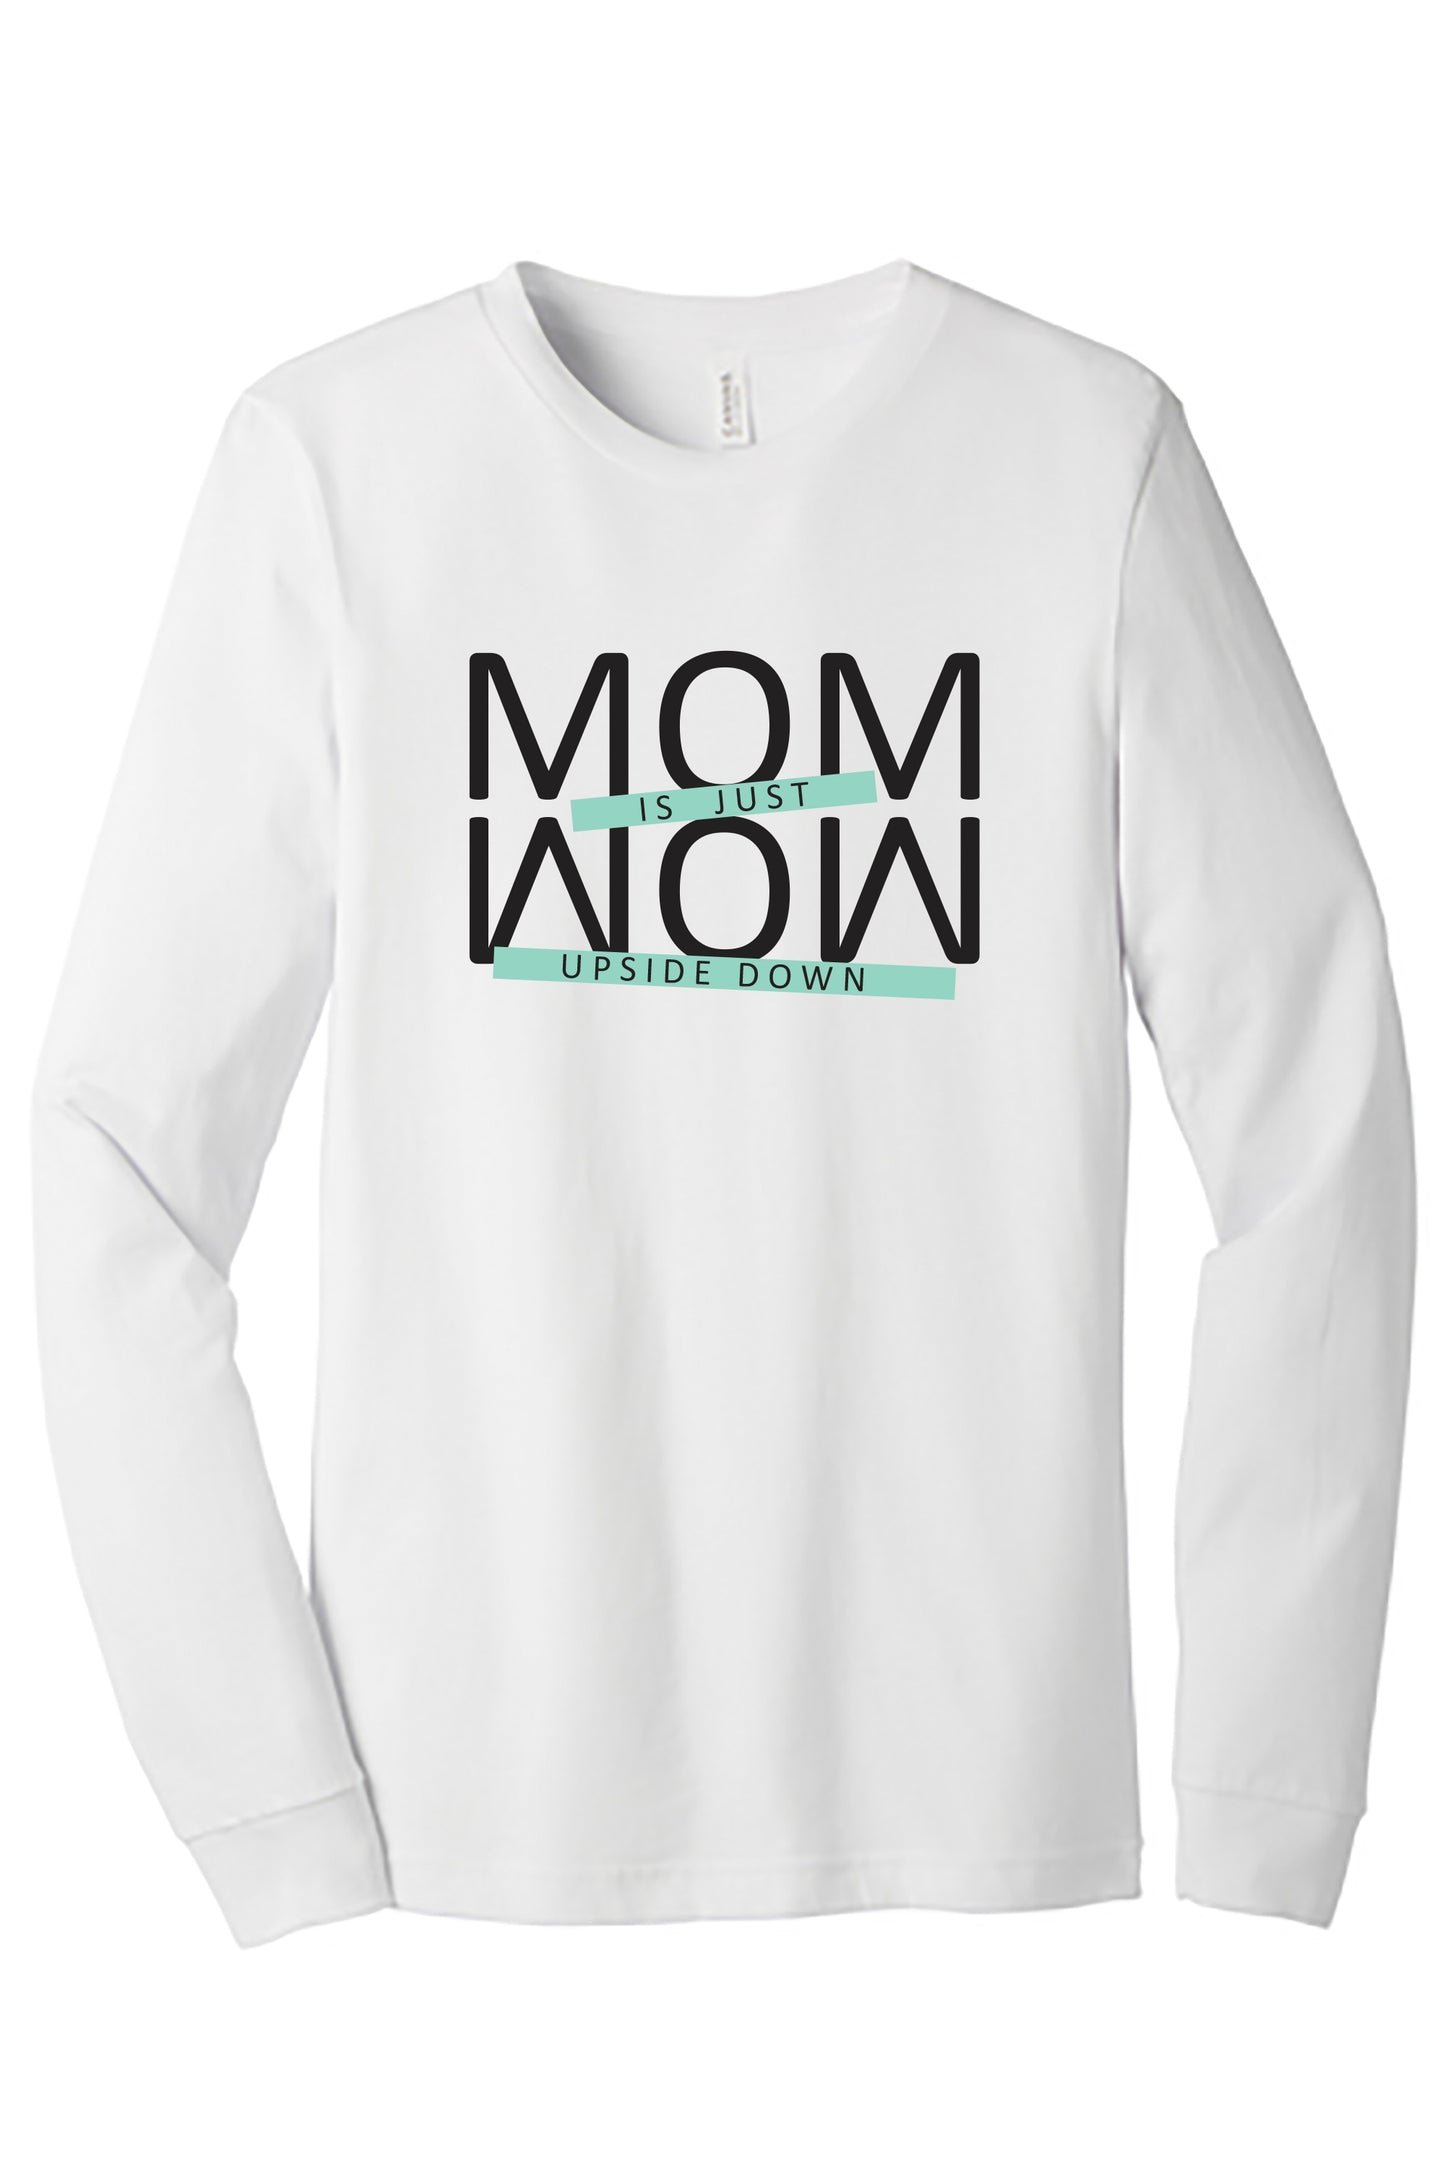 Mom Is Just Wow Upside Down Mothers Day Unisex Jersey Long Sleeve Tee